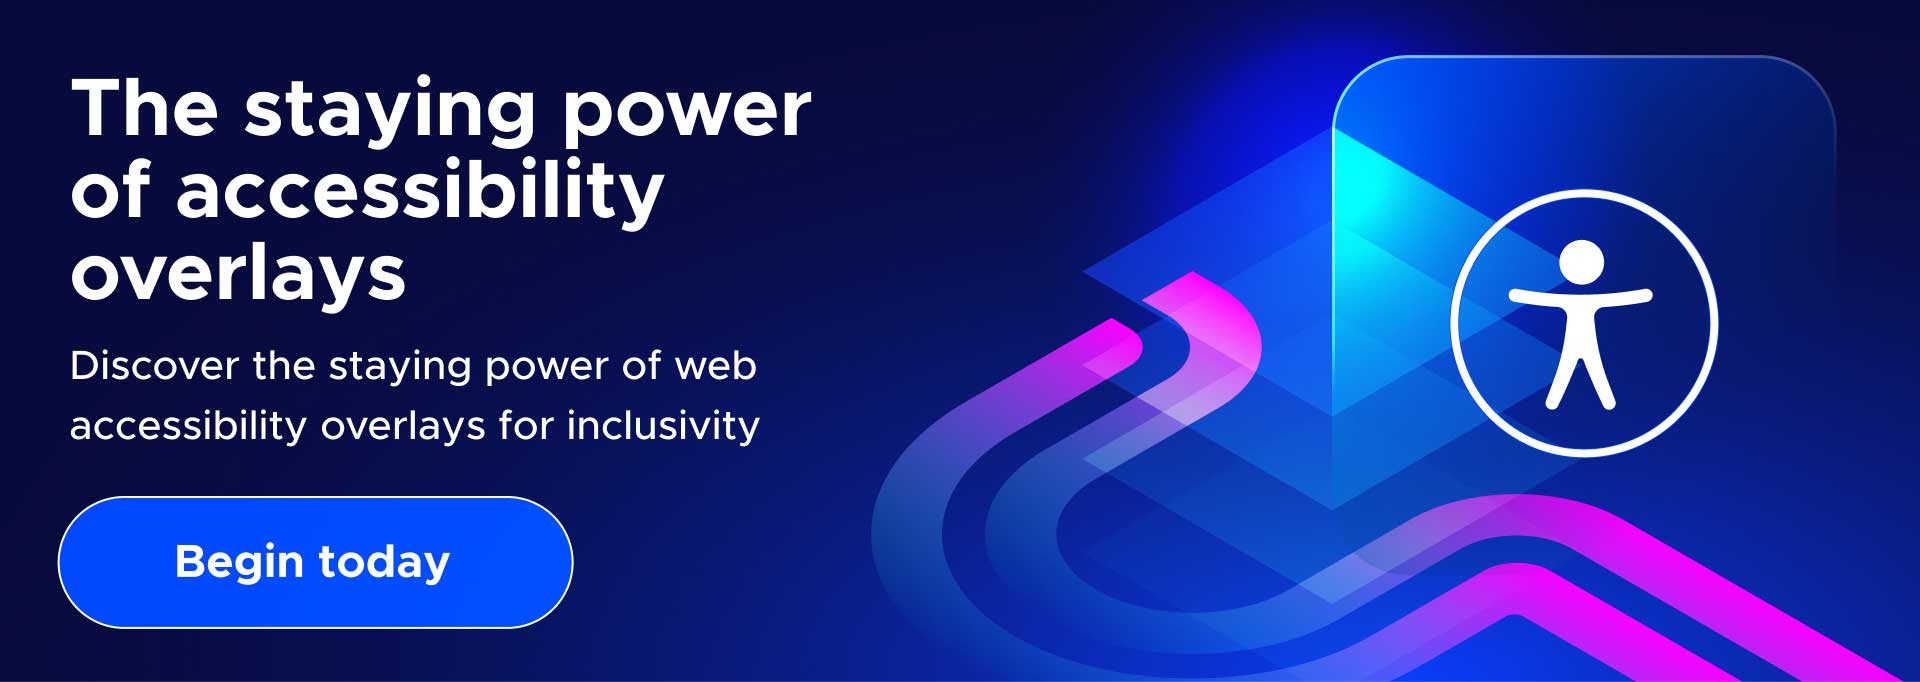 Discover the staying power of web accessibility overlays for inclusivity